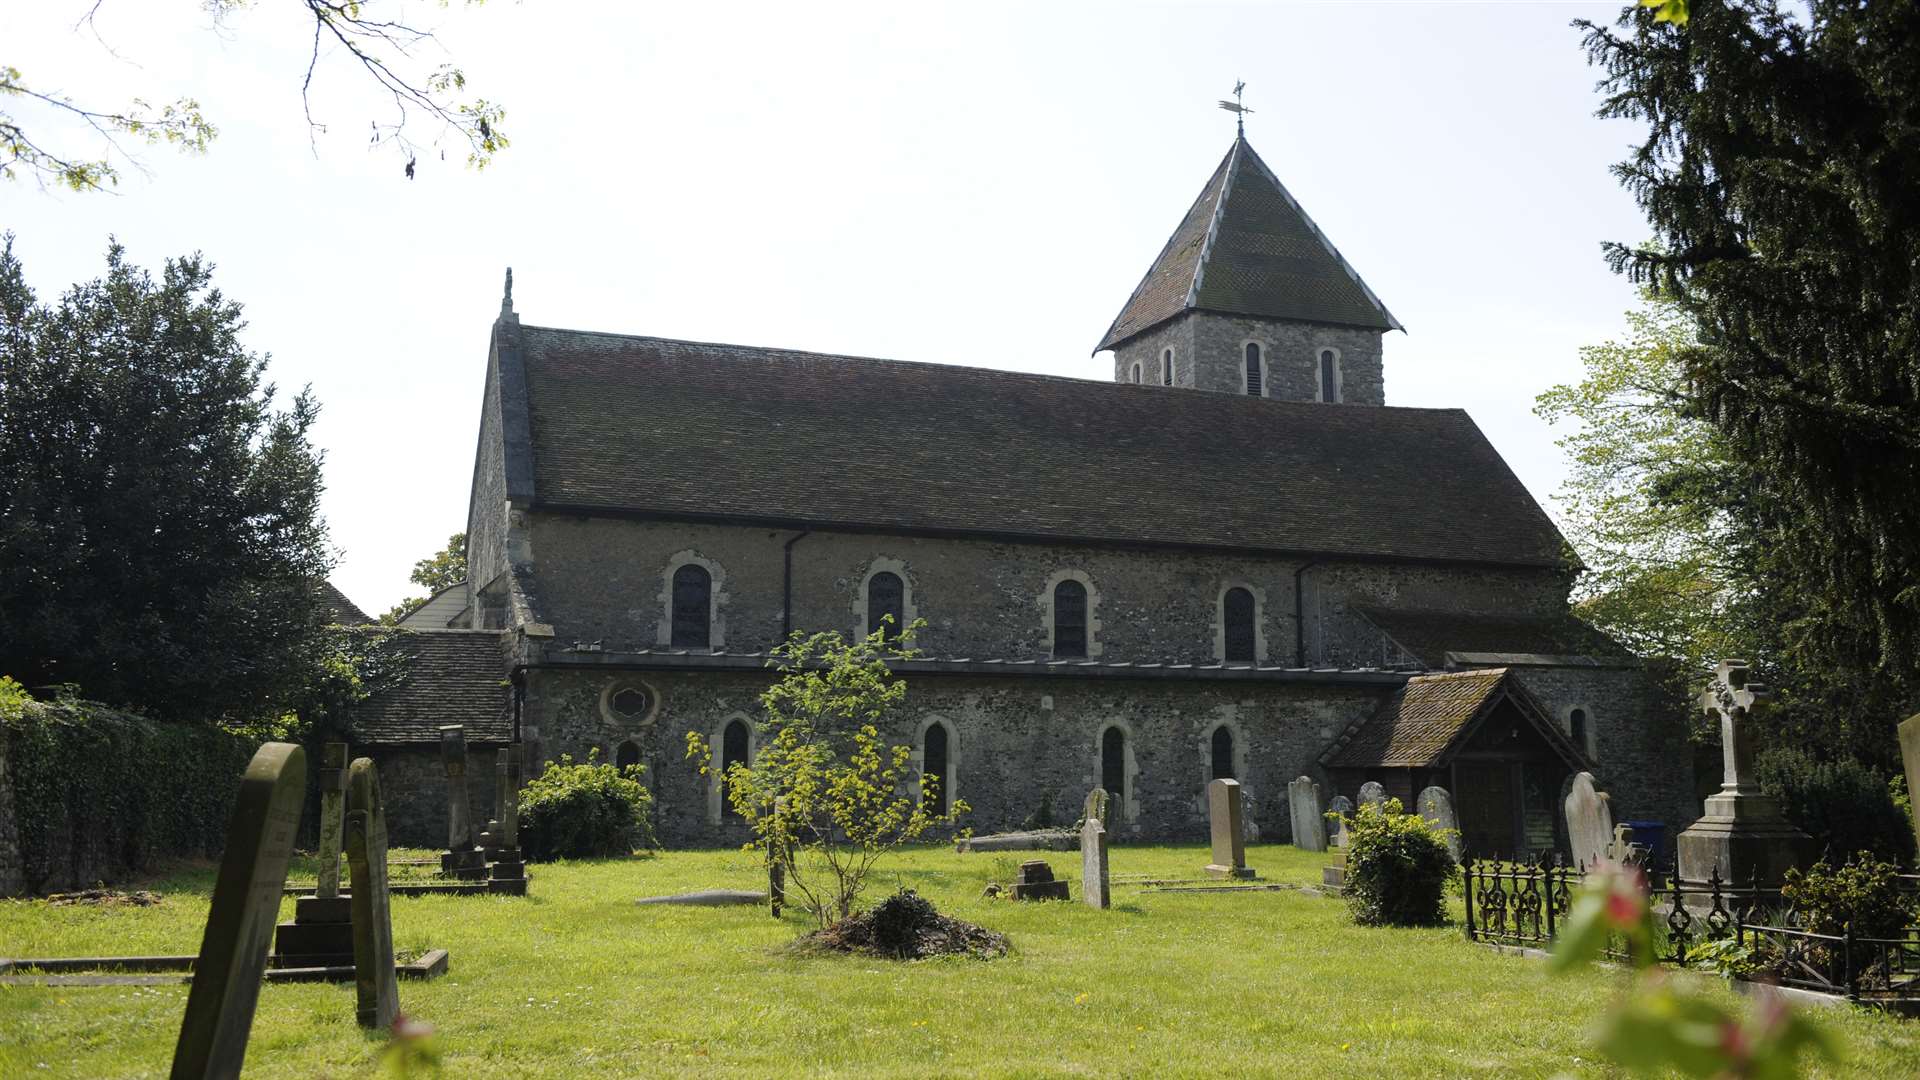 Davington Church was one of two to be targeted.